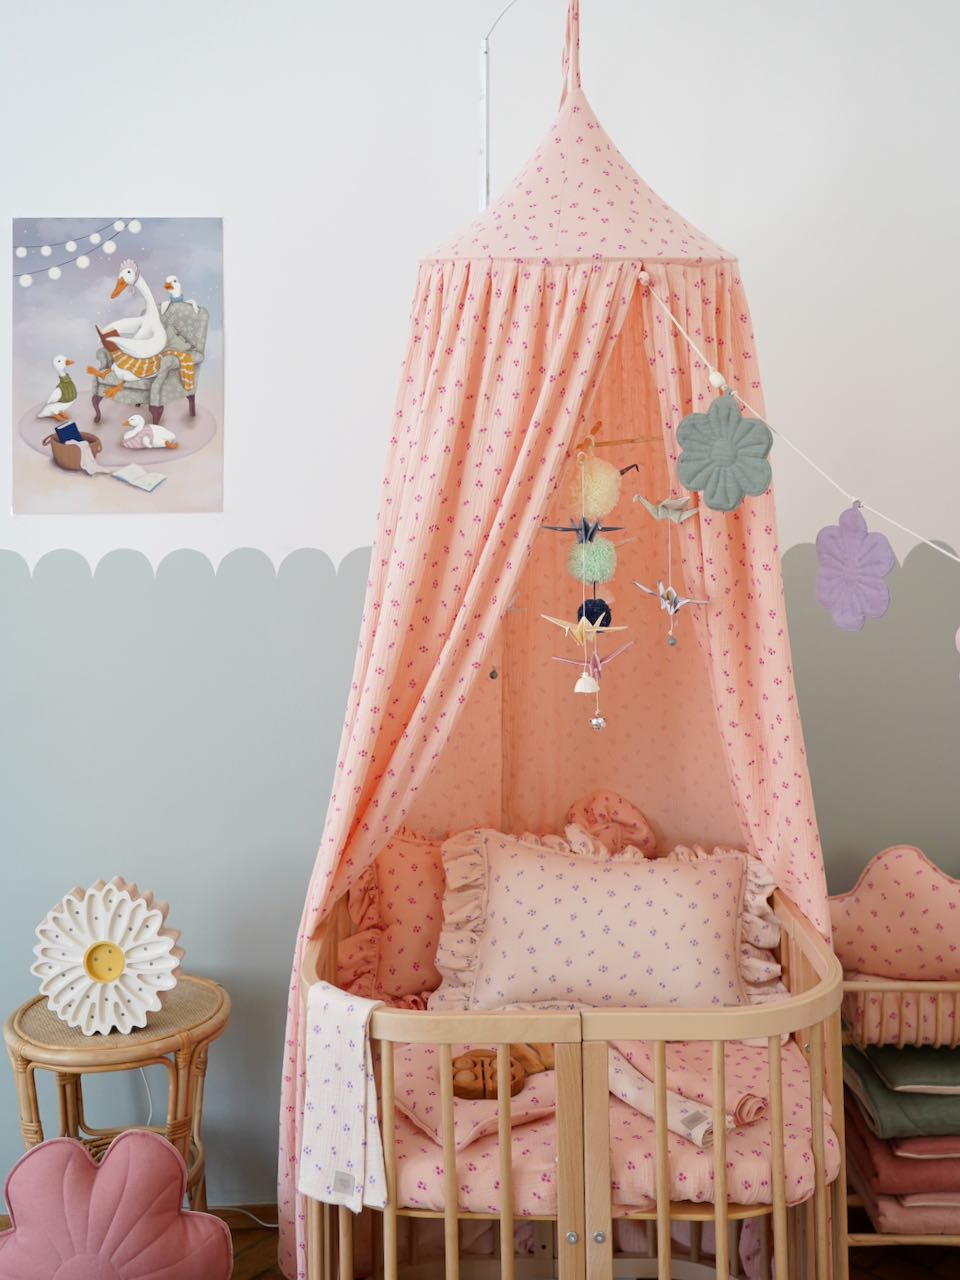 "Pink forget-me-not" Canopy by Moi Mili